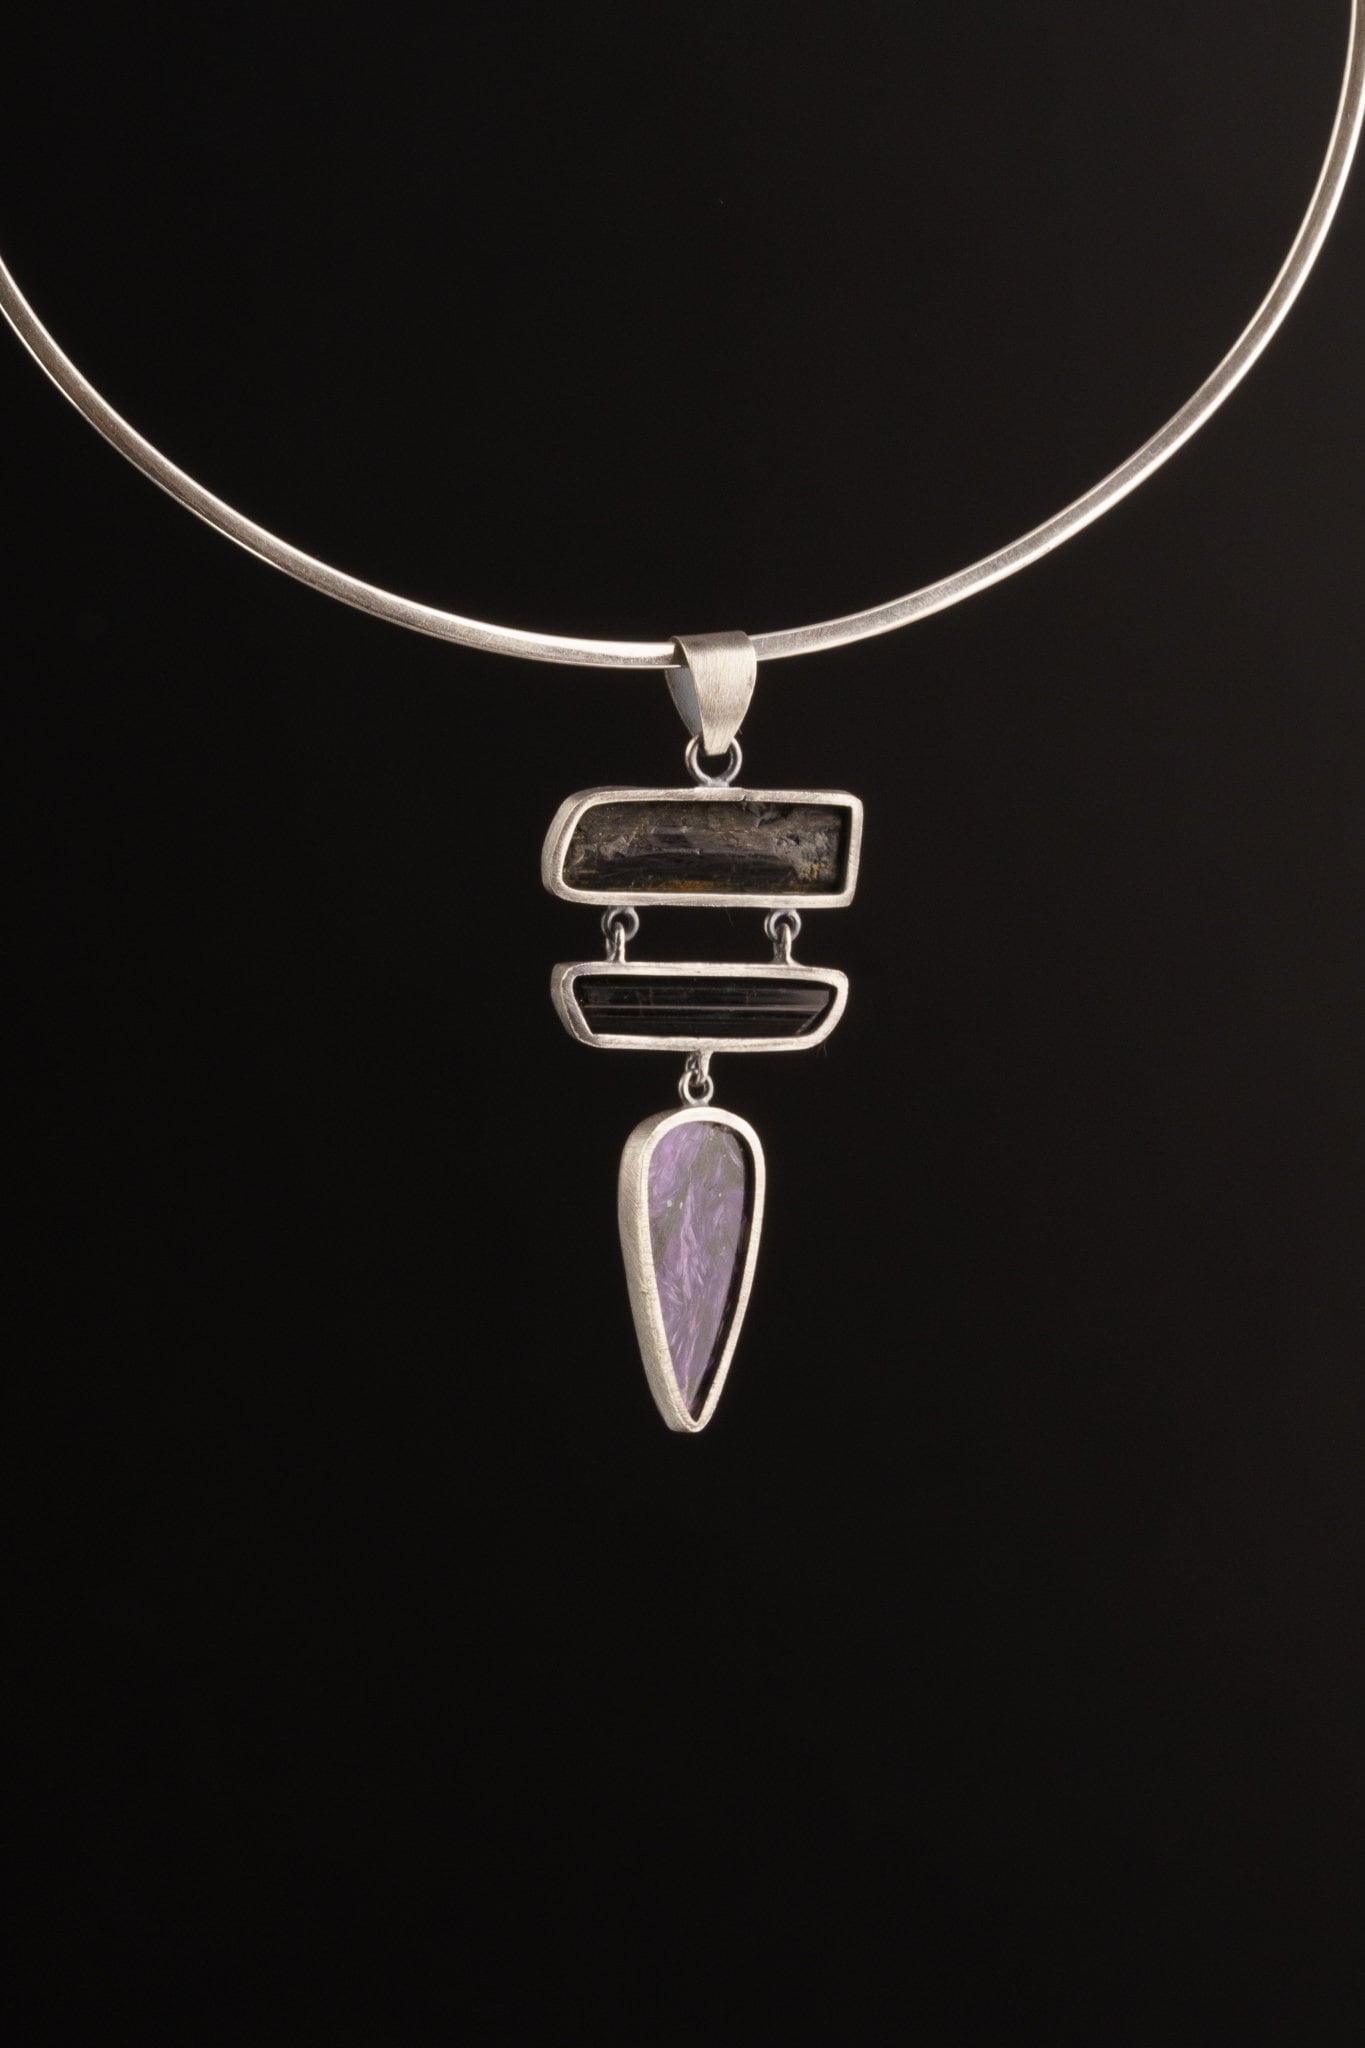 Rustic Finish Sterling Silver Pendant Featuring AAA Charoite Teardrop Cabochon & Double Bezeled Black Tourmaline Sticks, Dangle Necklace